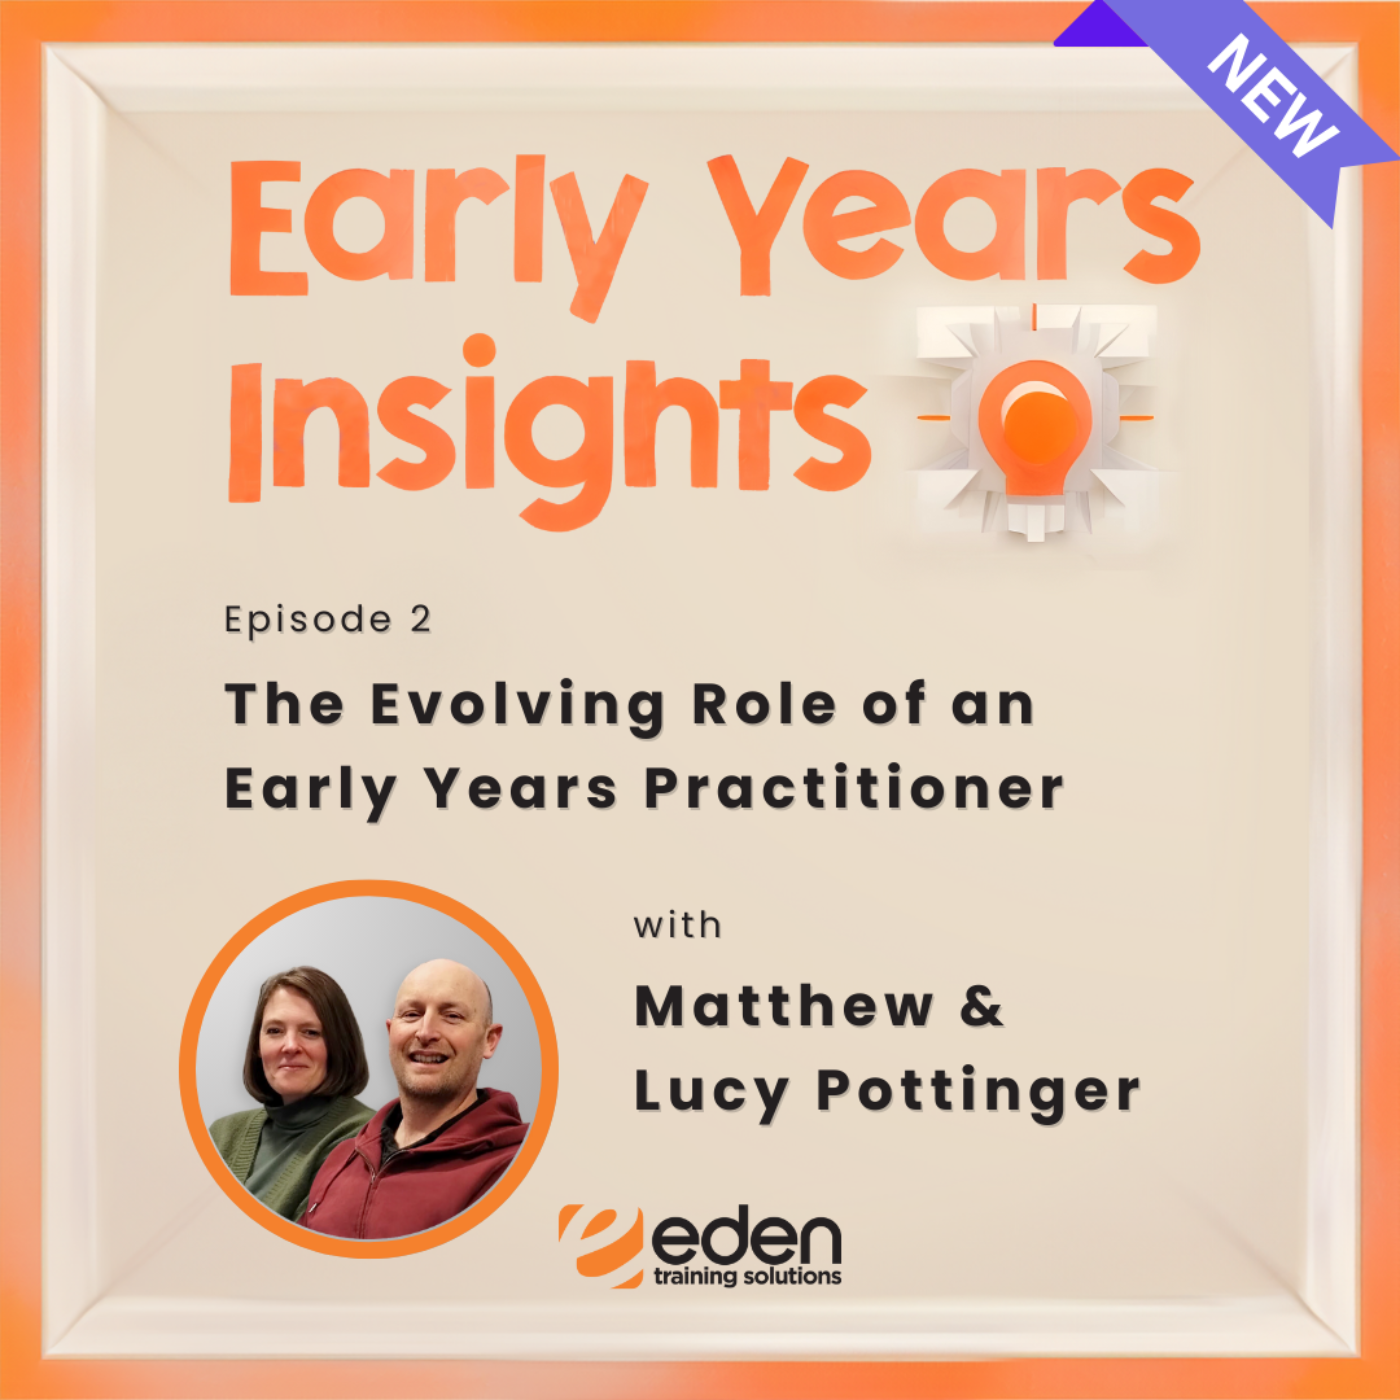 Episode 2: The Evolving Role of an Early Years Practitioner